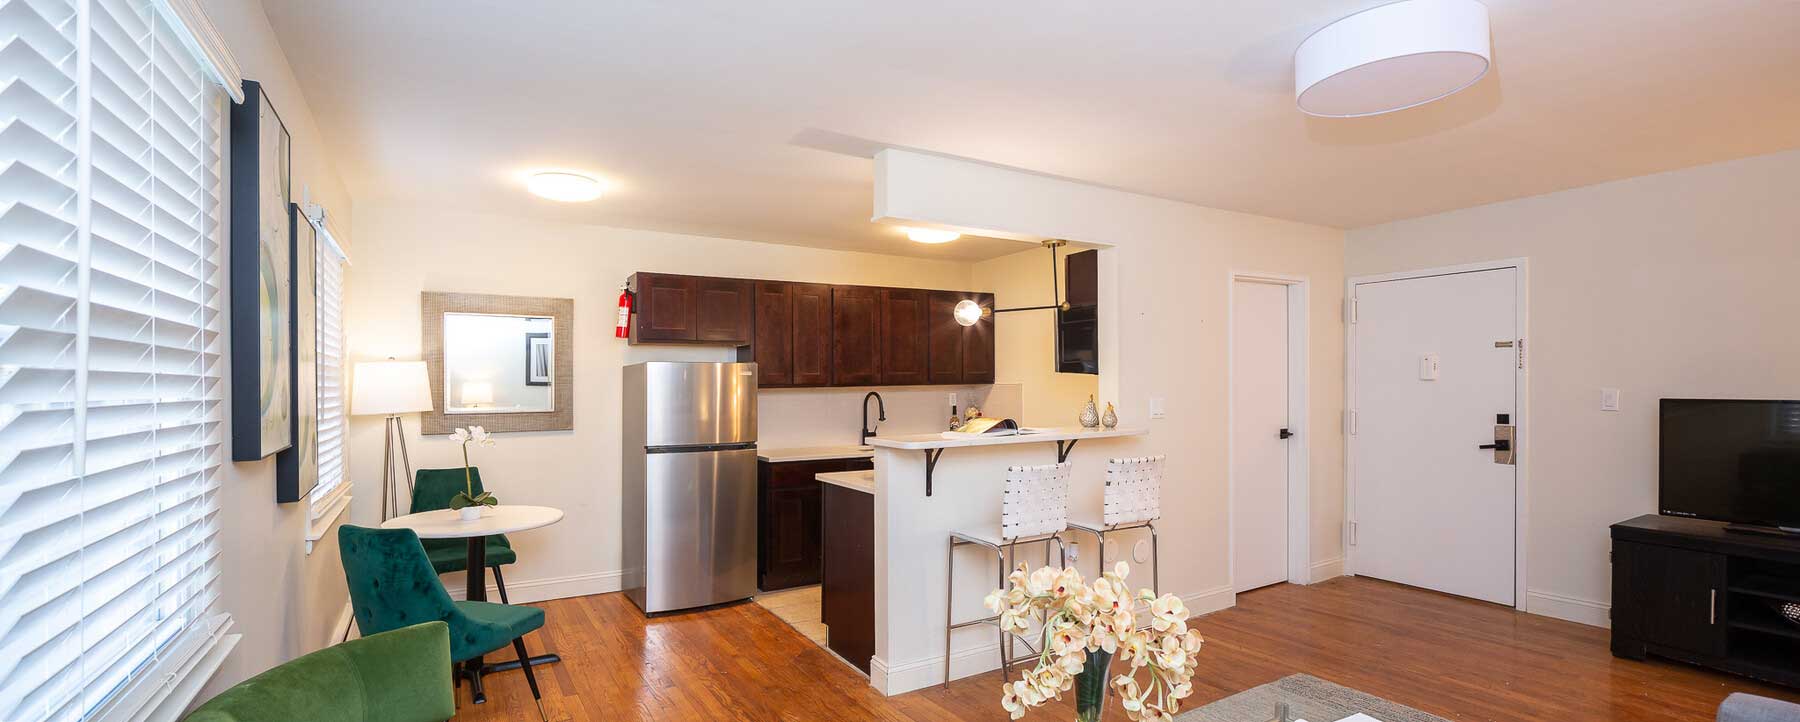 Kitchen at Livingston Gardens Apartments in North Brunswick Township, New Jersey